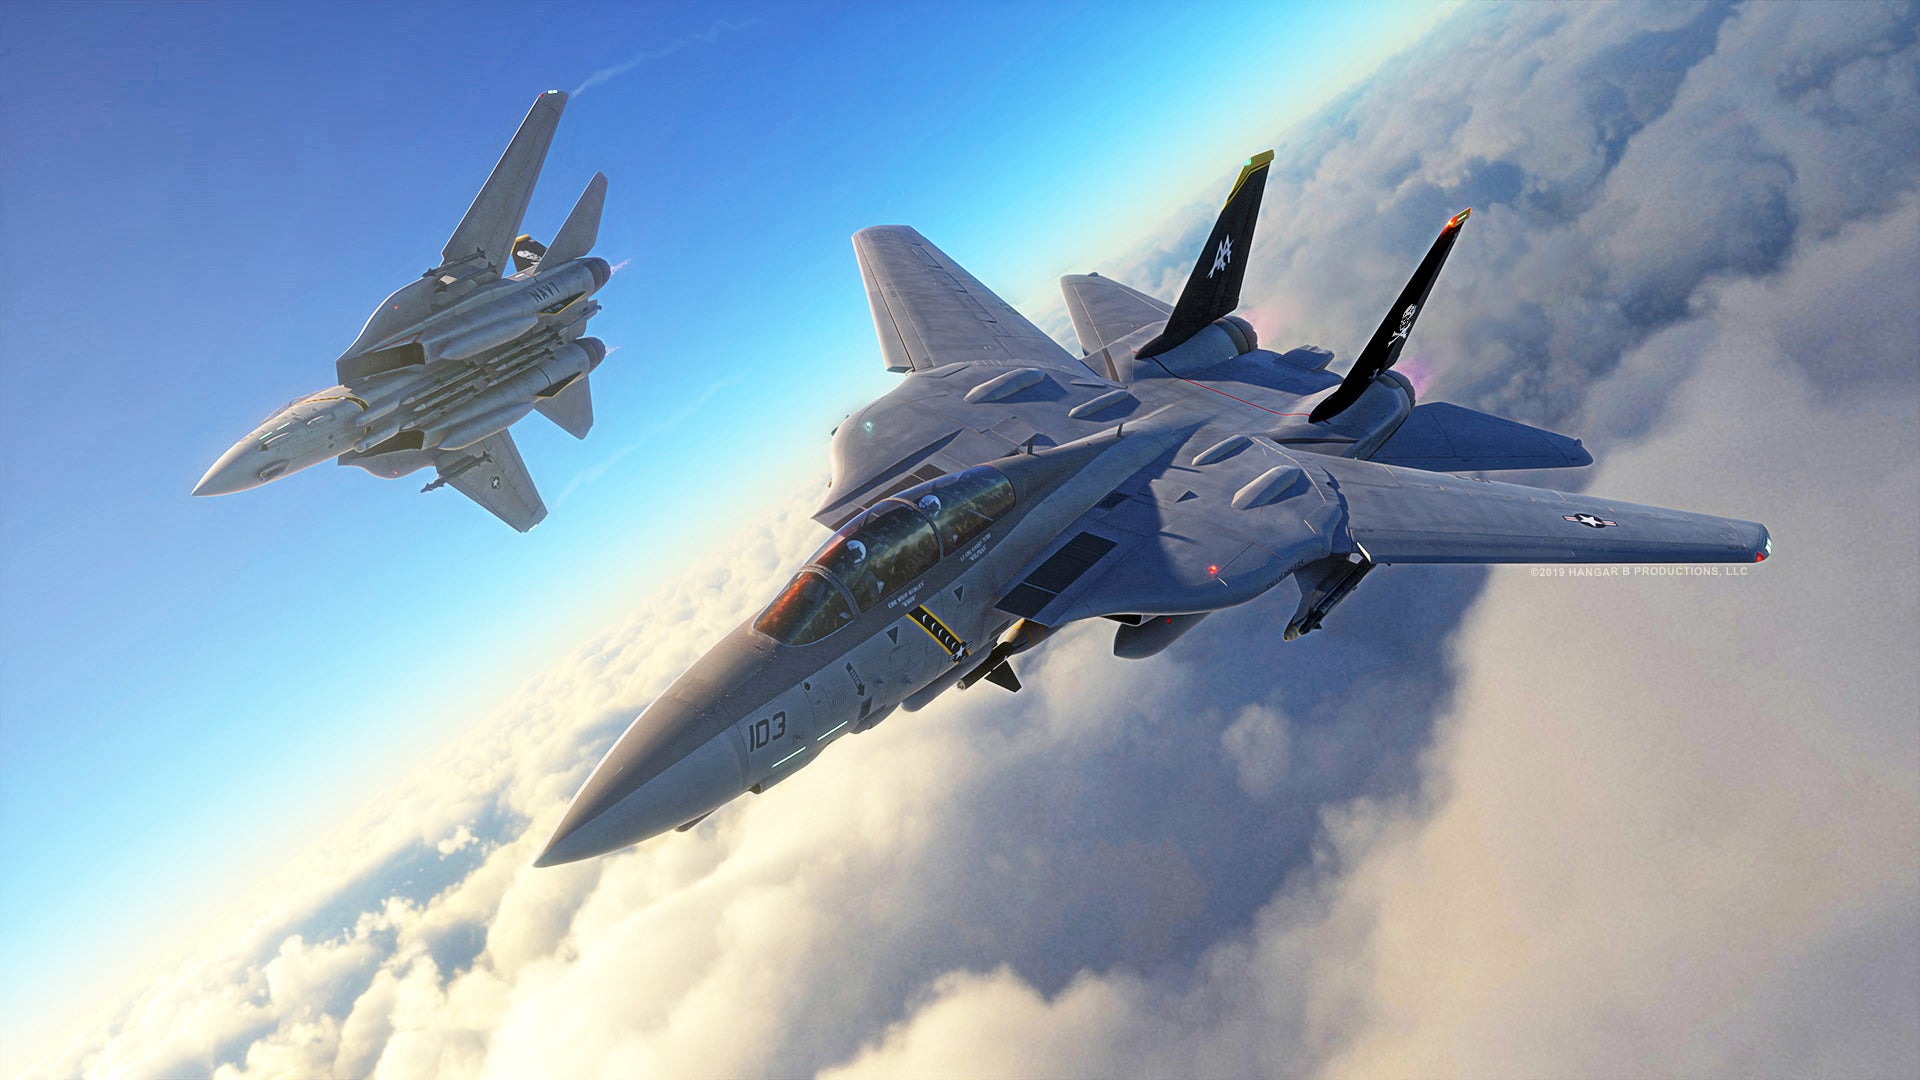 This Is What Grumman's Proposed F-14 Super Tomcat 21 Would Have